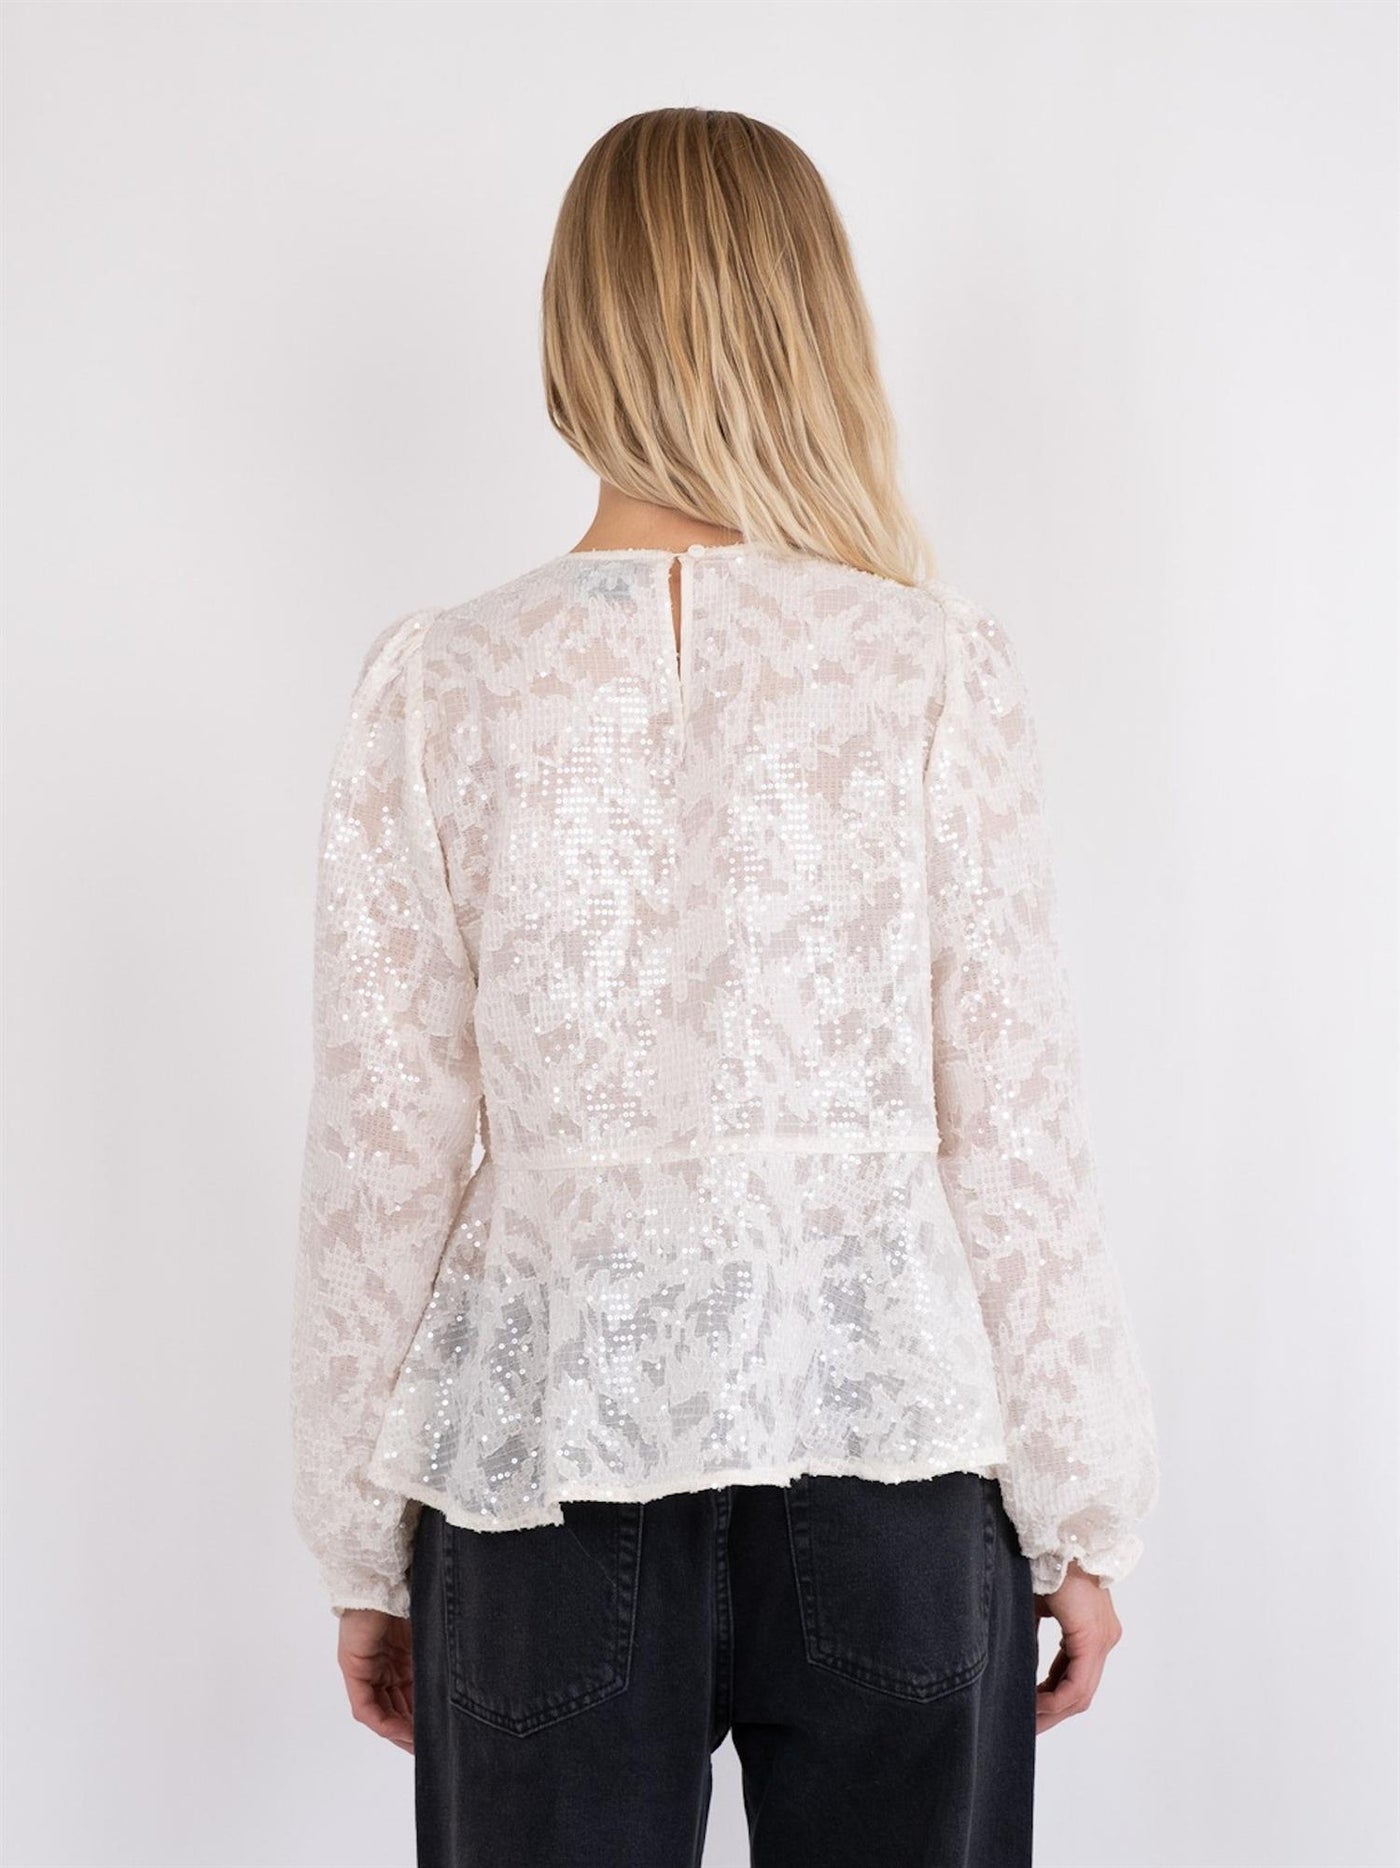 Rizzo Sequins Blouse Ivory